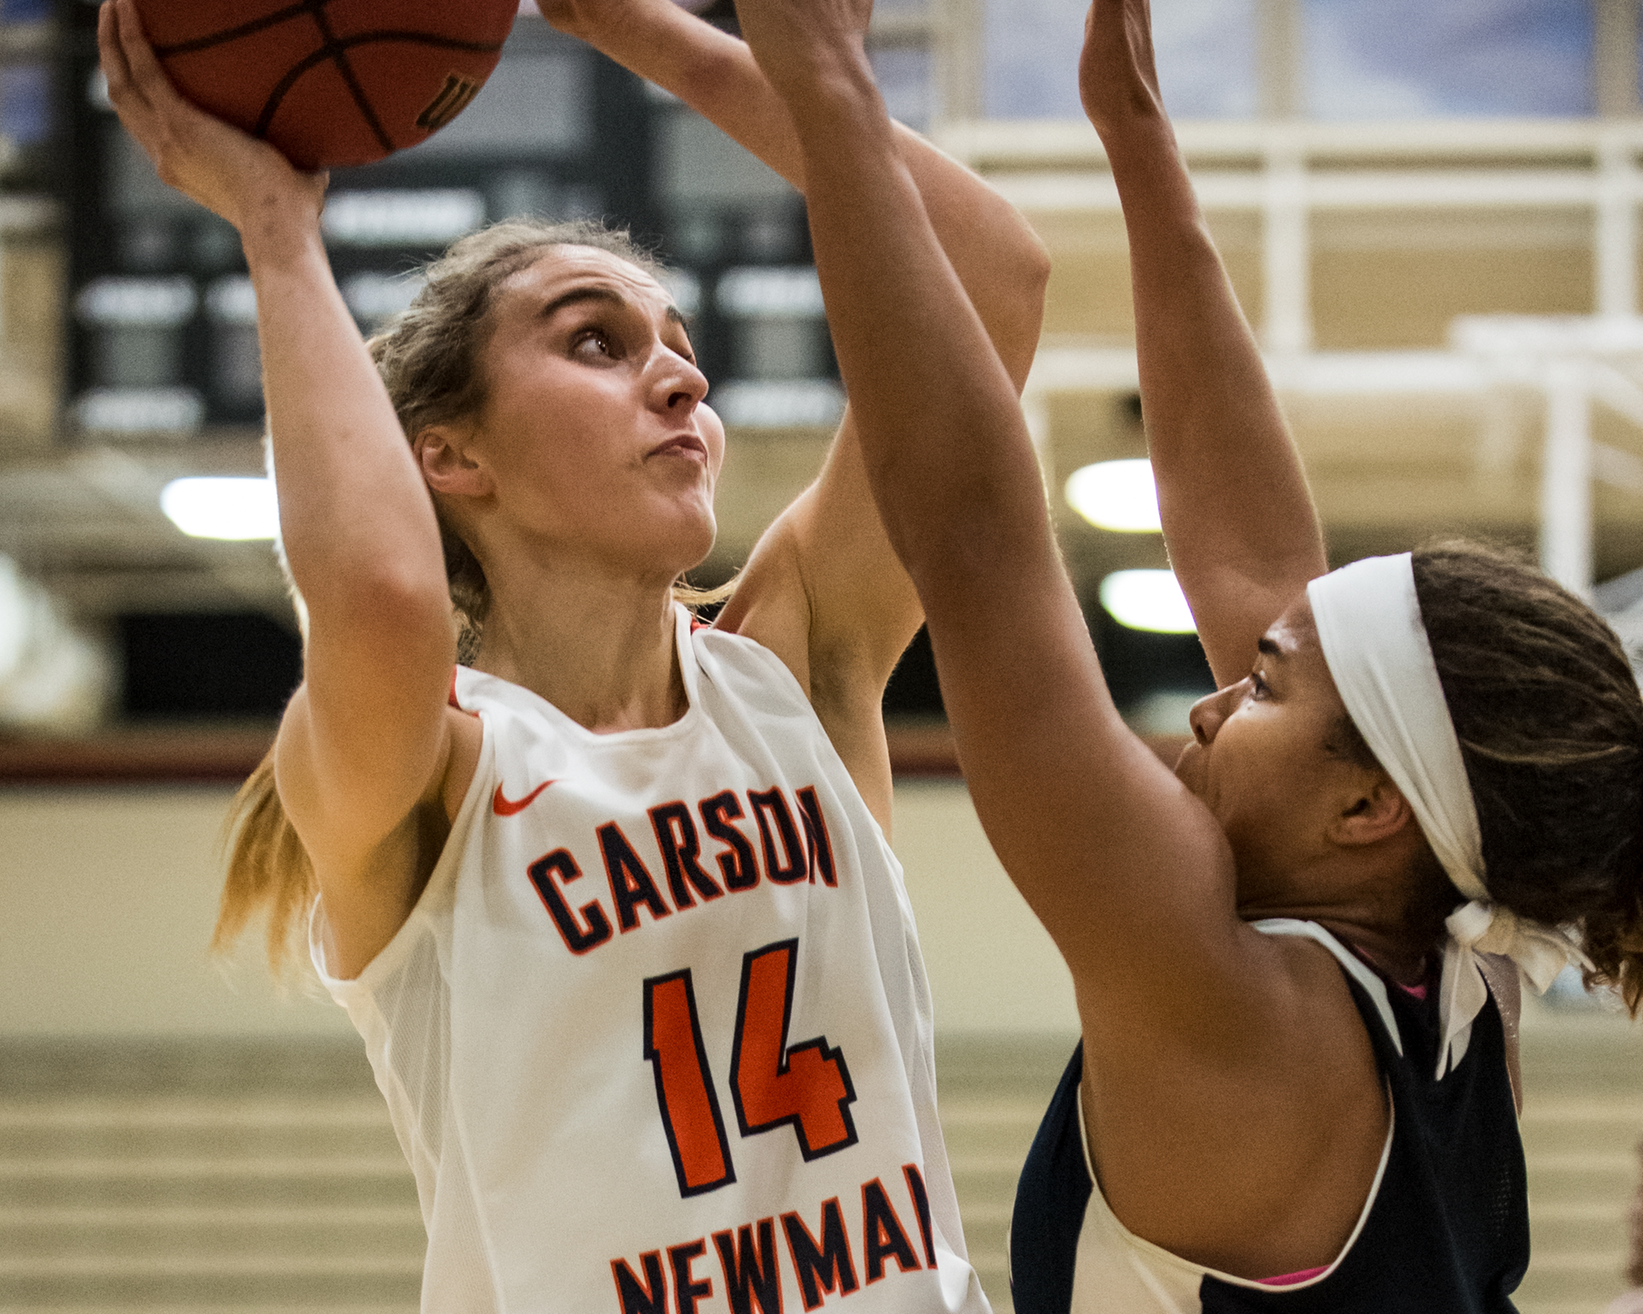 Bears bust Lady Eagles with late free throw